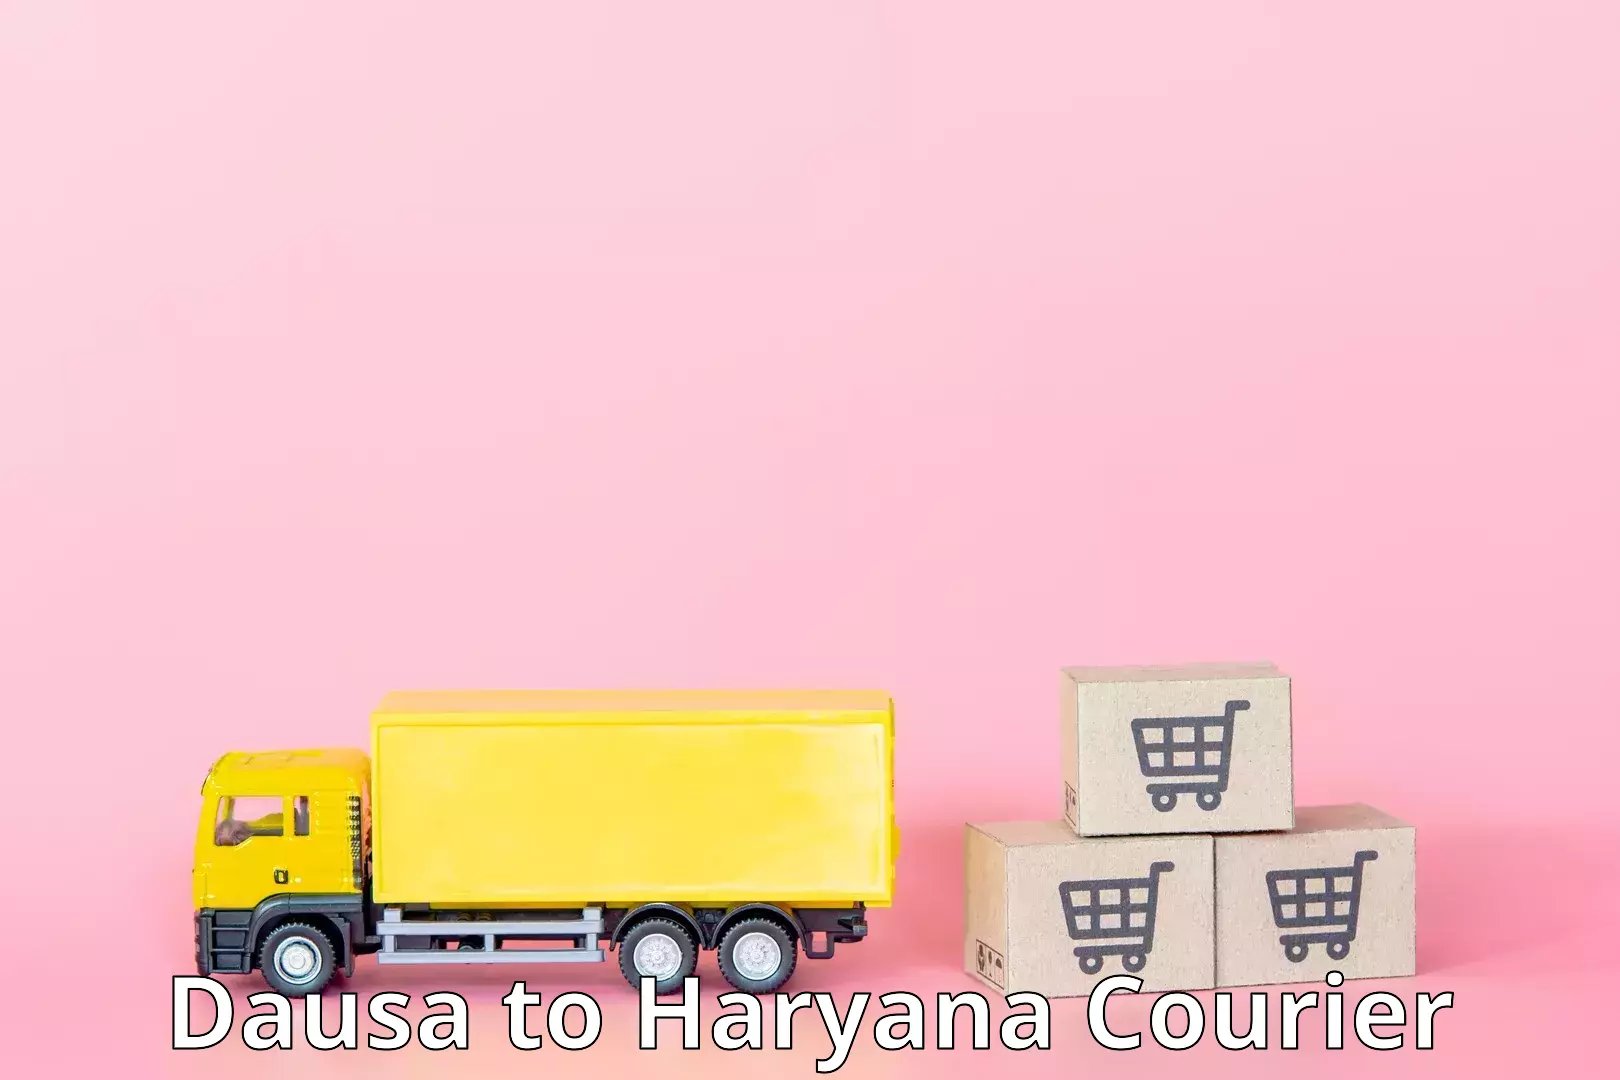 24-hour courier service Dausa to Panipat